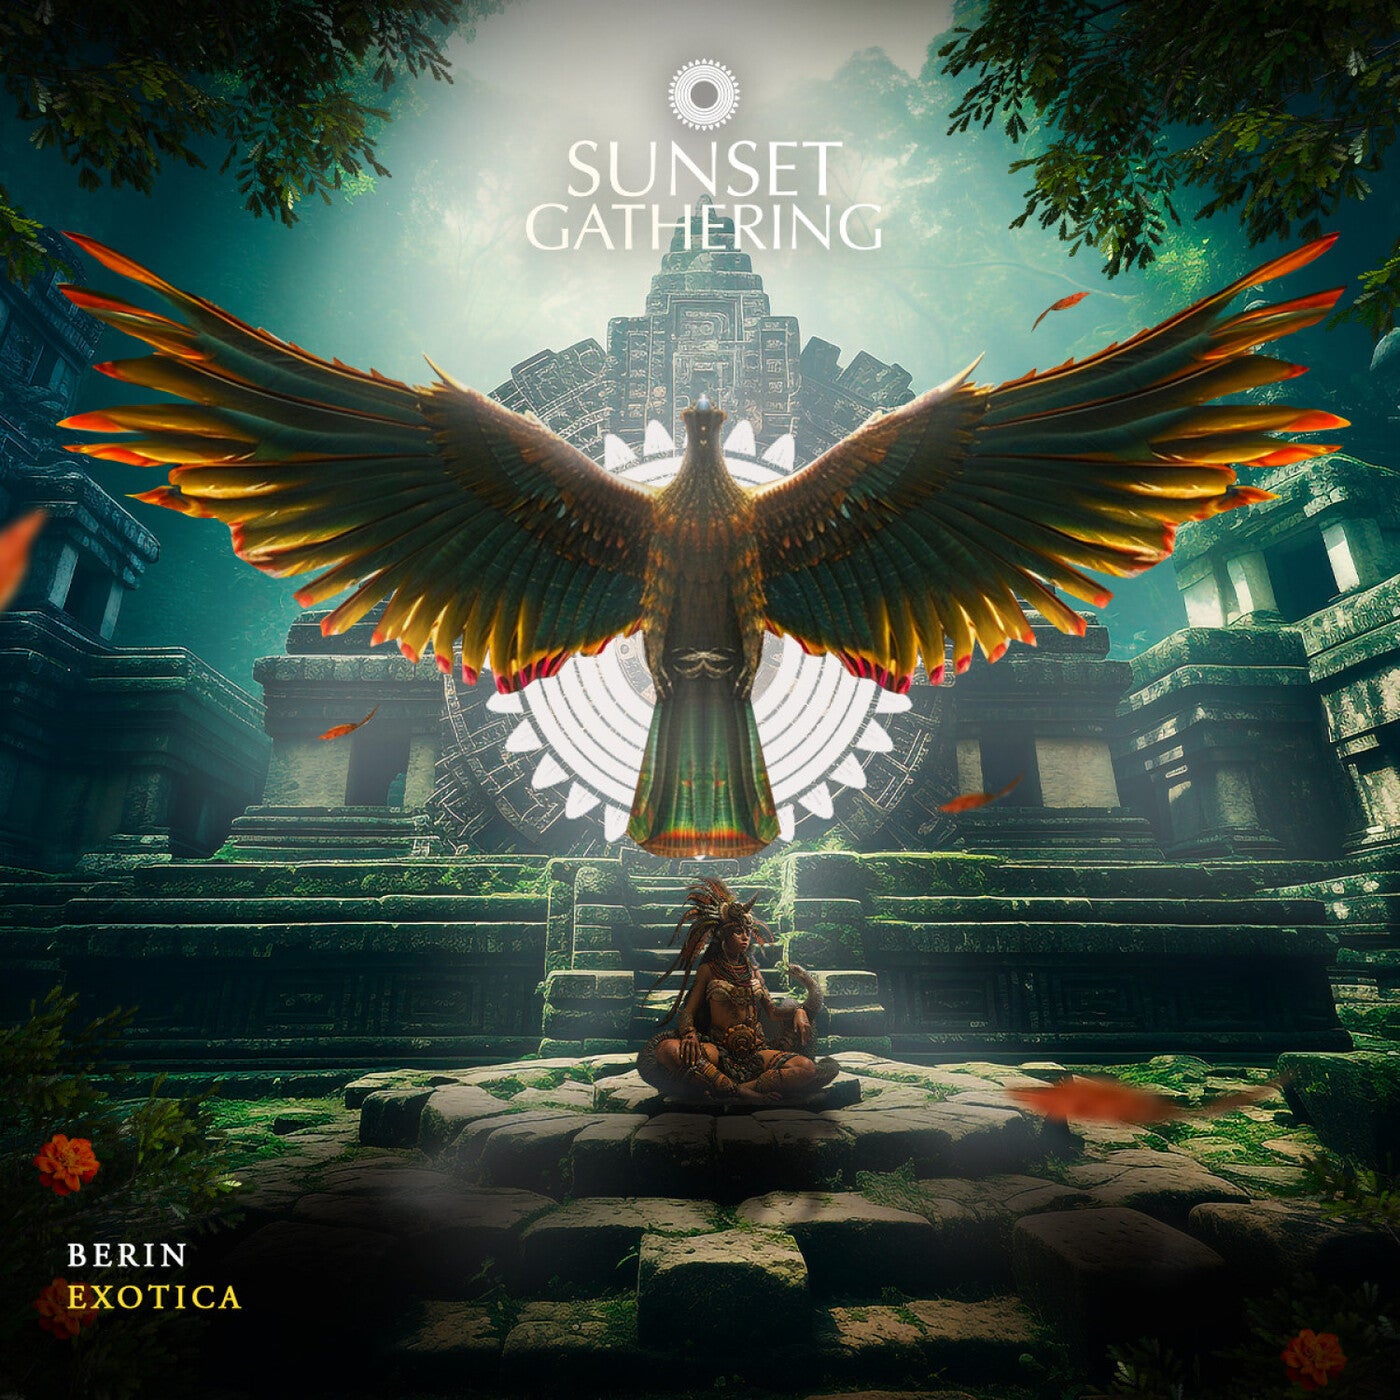 image cover: Berin - Exotica (Original Mix) on Sunset Gathering